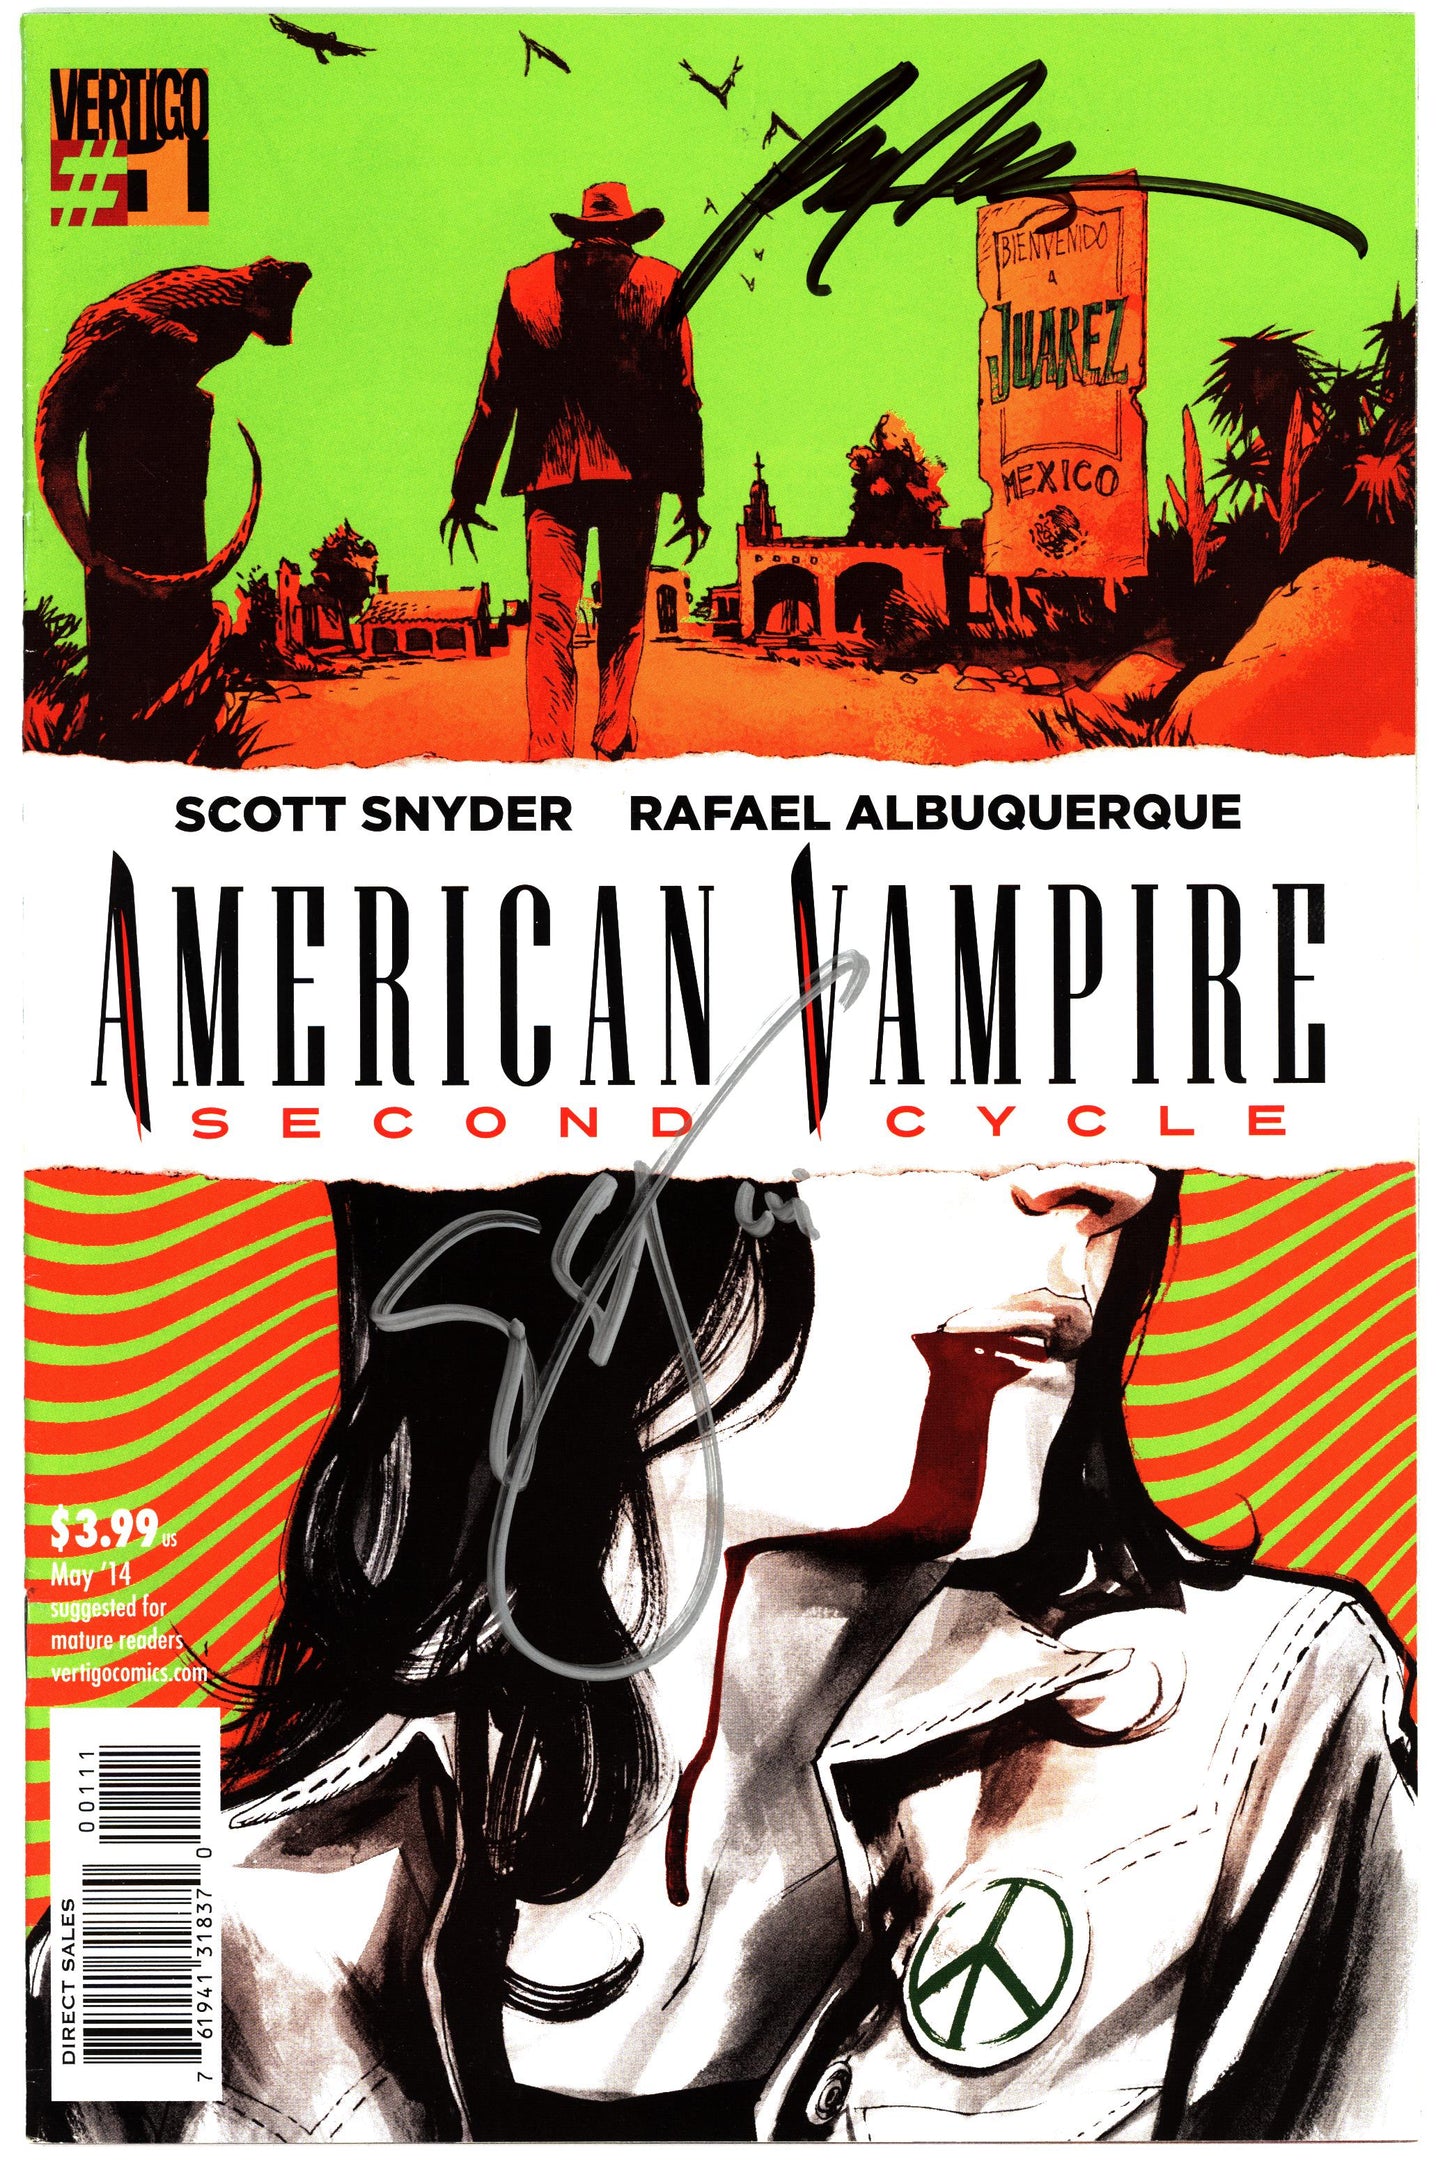 American Vampire Second Cycle #1 - 2x Signé